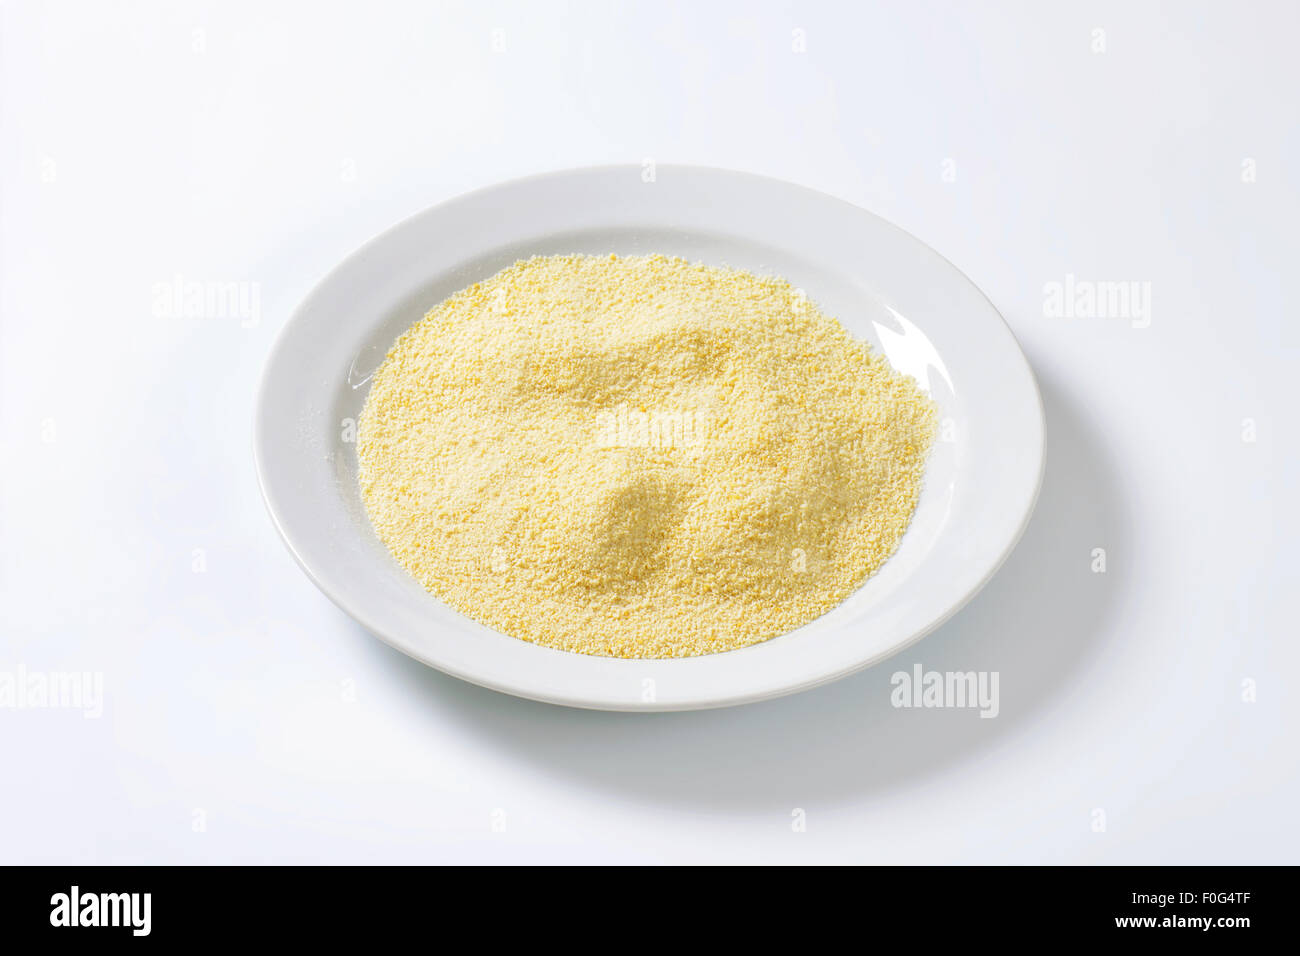 Pile of finely ground bread crumbs on plate Stock Photo